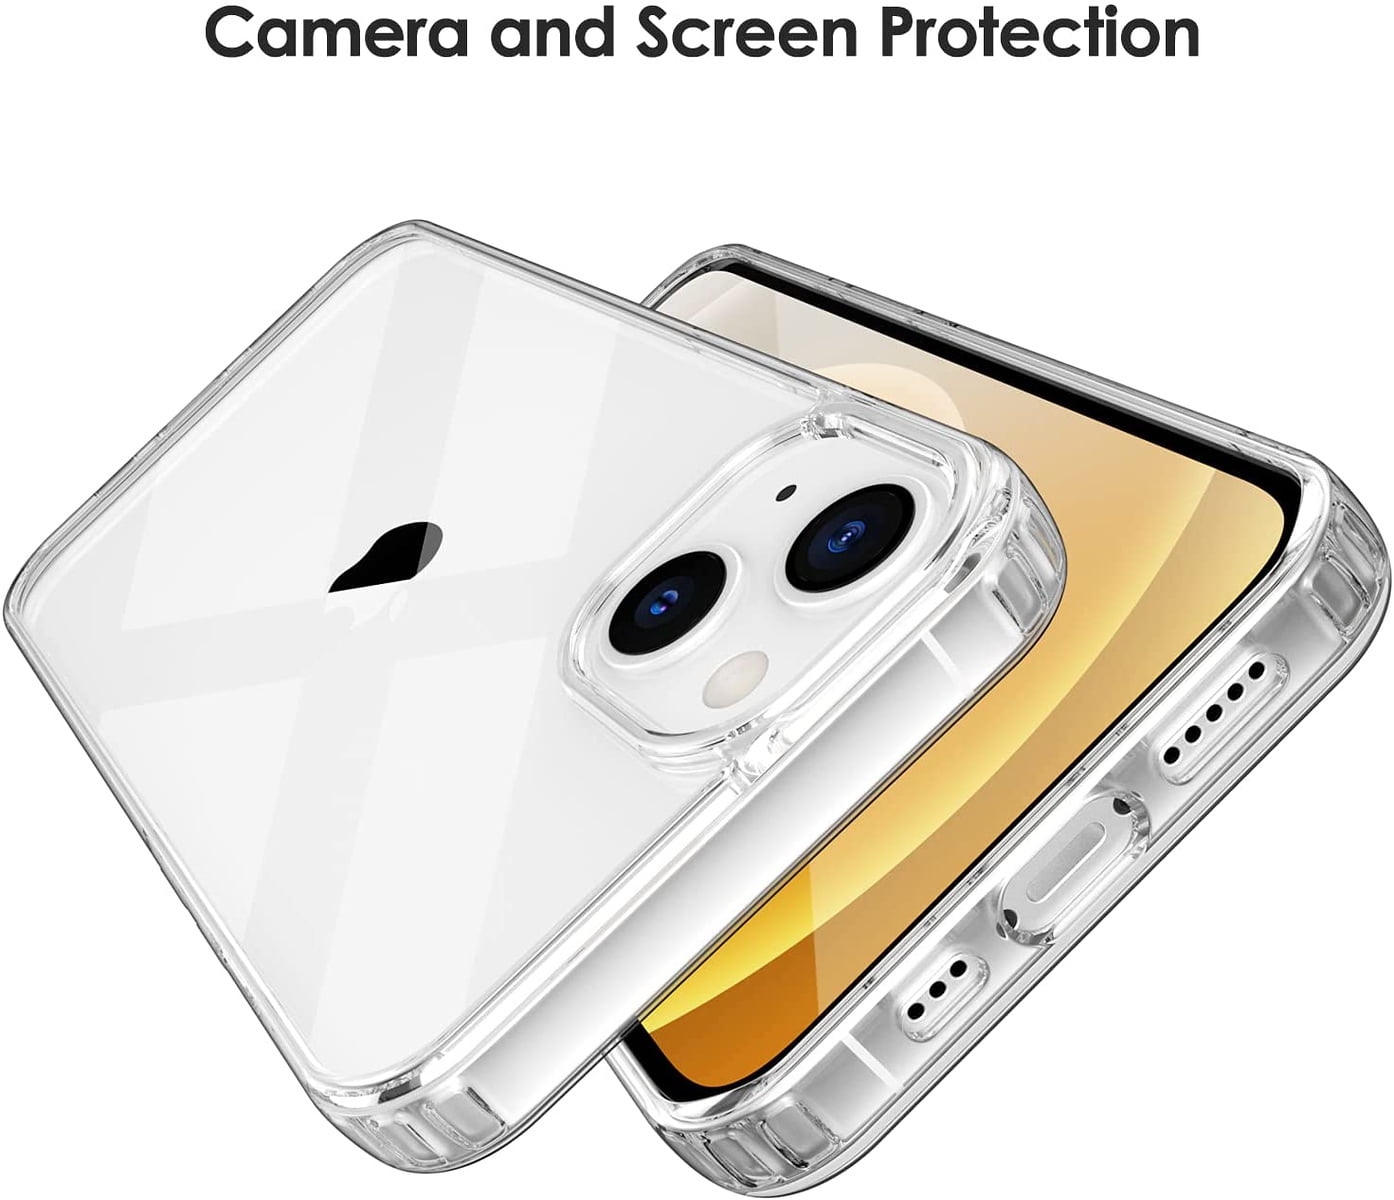 for Apple iPhone 14 Plus 6.7 inch Golden Chrome Frame Transparent Hybrid with Lens Protector Shockproof Bumper Hard Back Phone Case Cover by Xpression